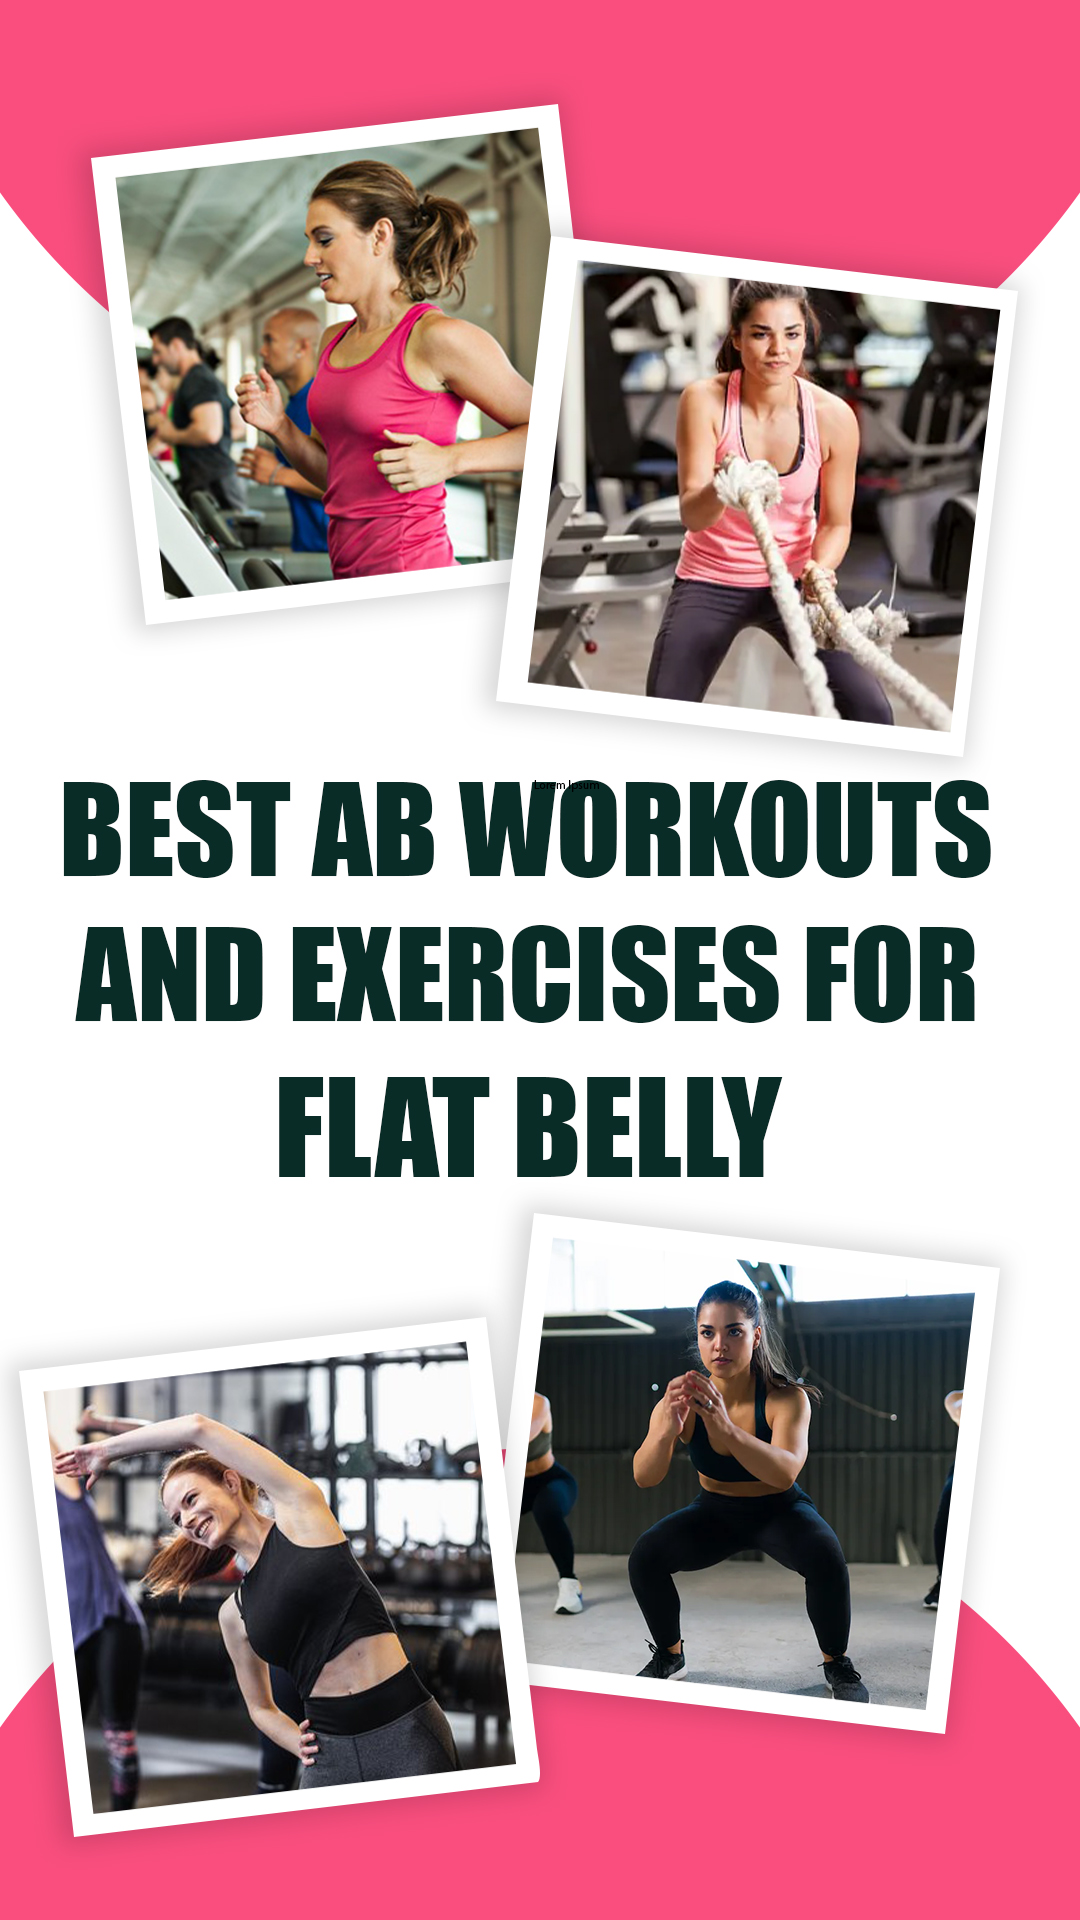 THE BEST AB WORKOUTS AND EXERCISES FOR WOMEN